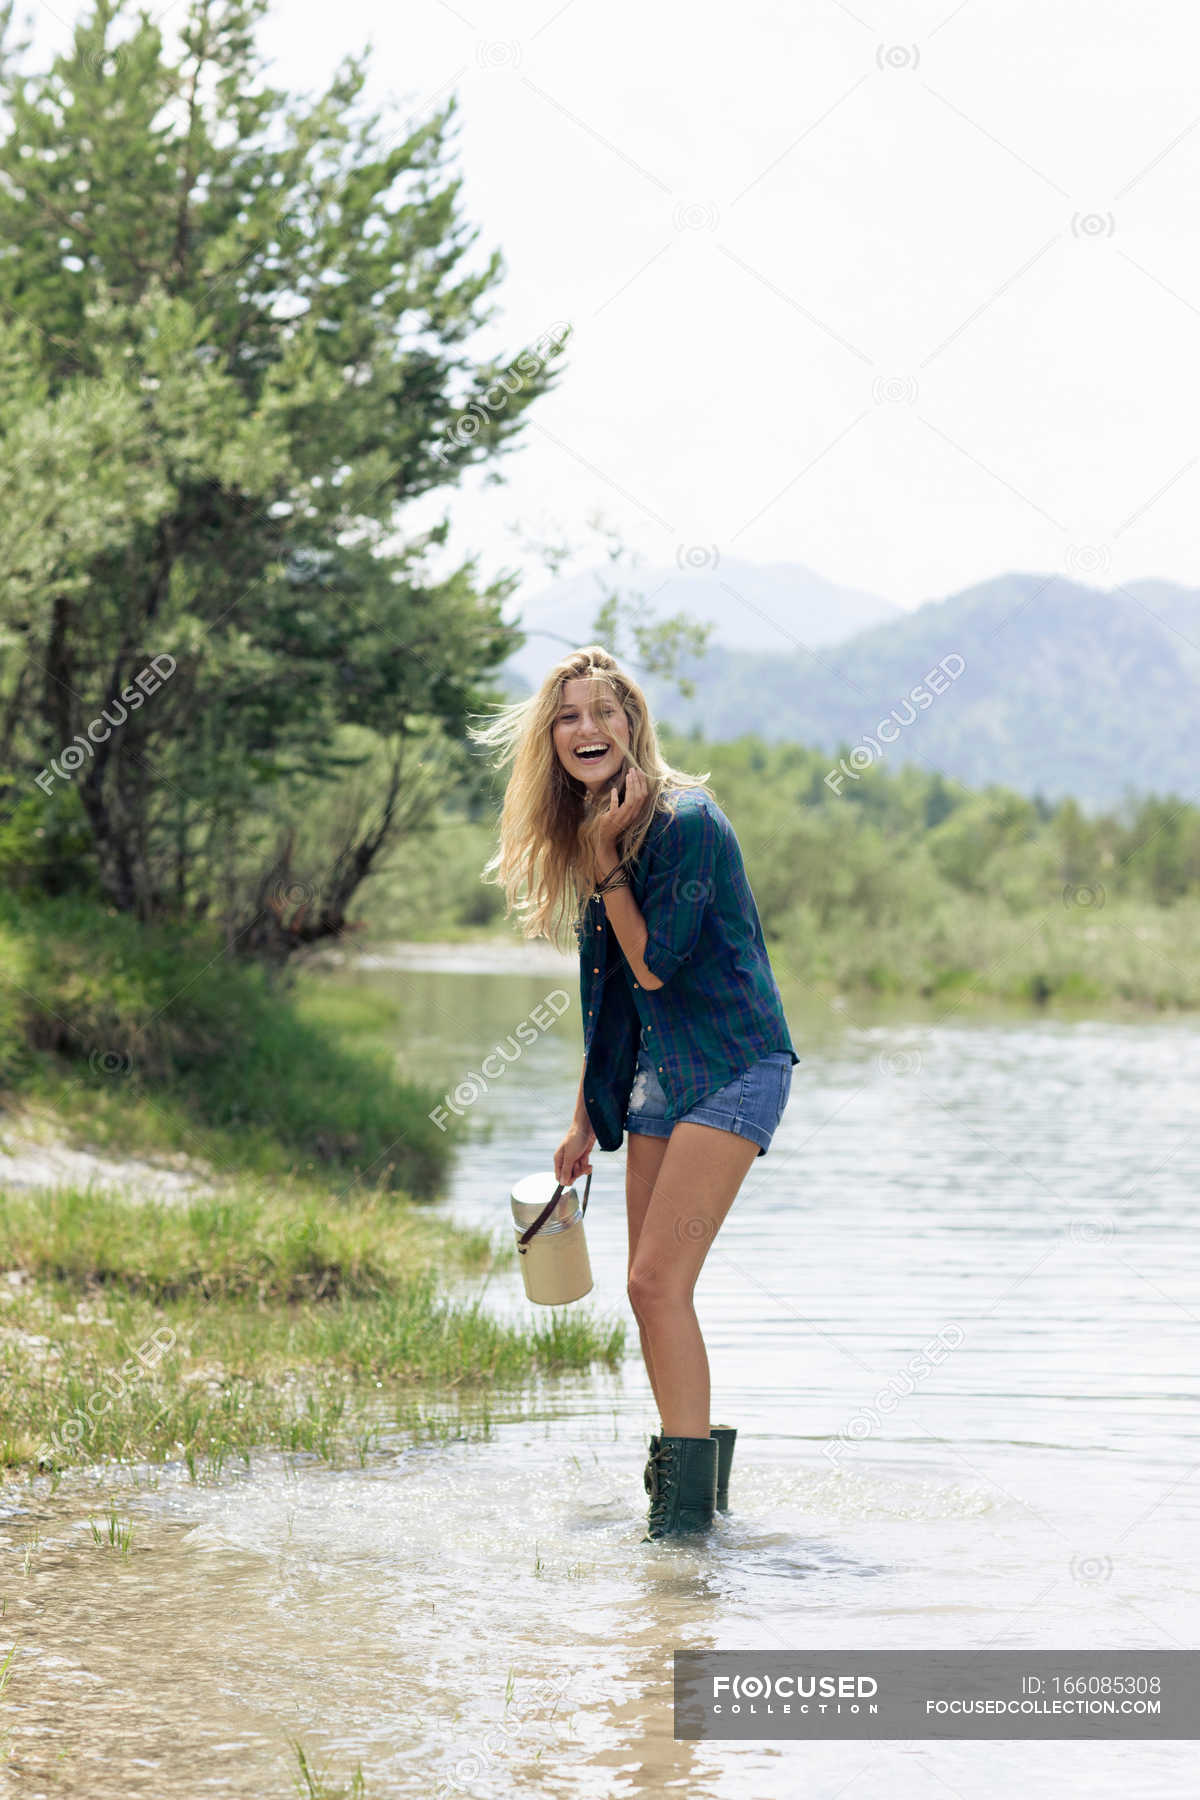 Woman in boots playing in river 